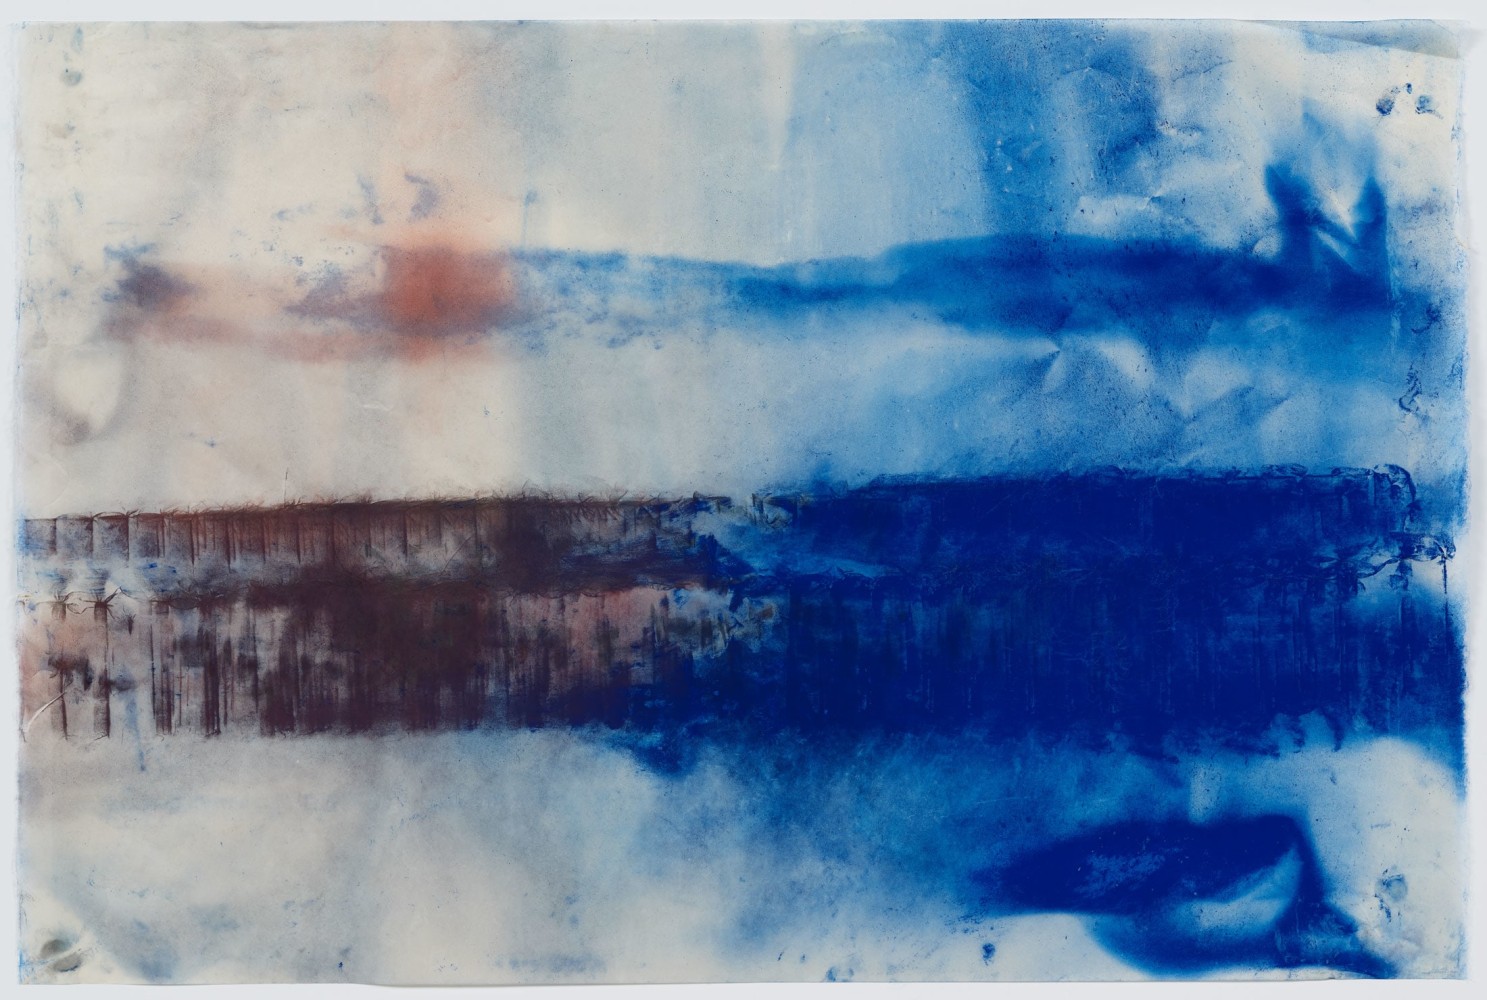 Jason Moran
Bathing the Room with Blues 2, 2020
Pigment on Gampi paper
25 1/4 x 38 inches
(64.1 x 96.5 cm)